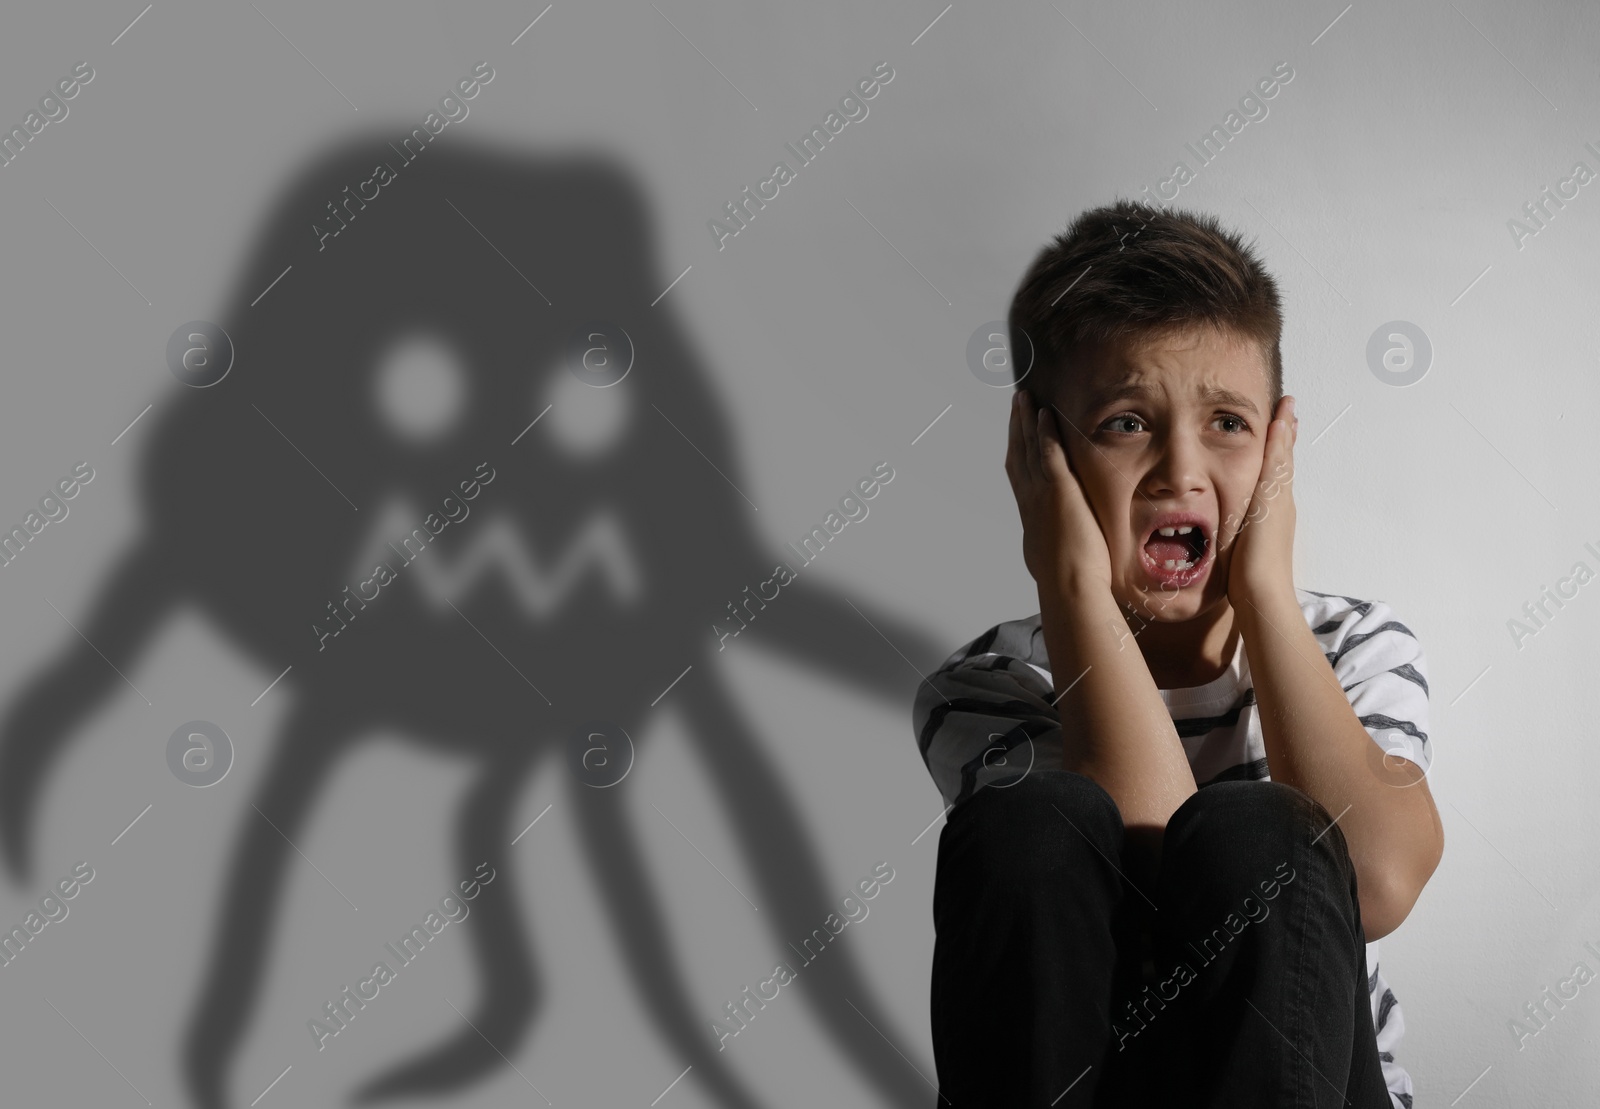 Image of Scared little boy suffering from sciophobia and phantom behind him. Irrational fear of shadows